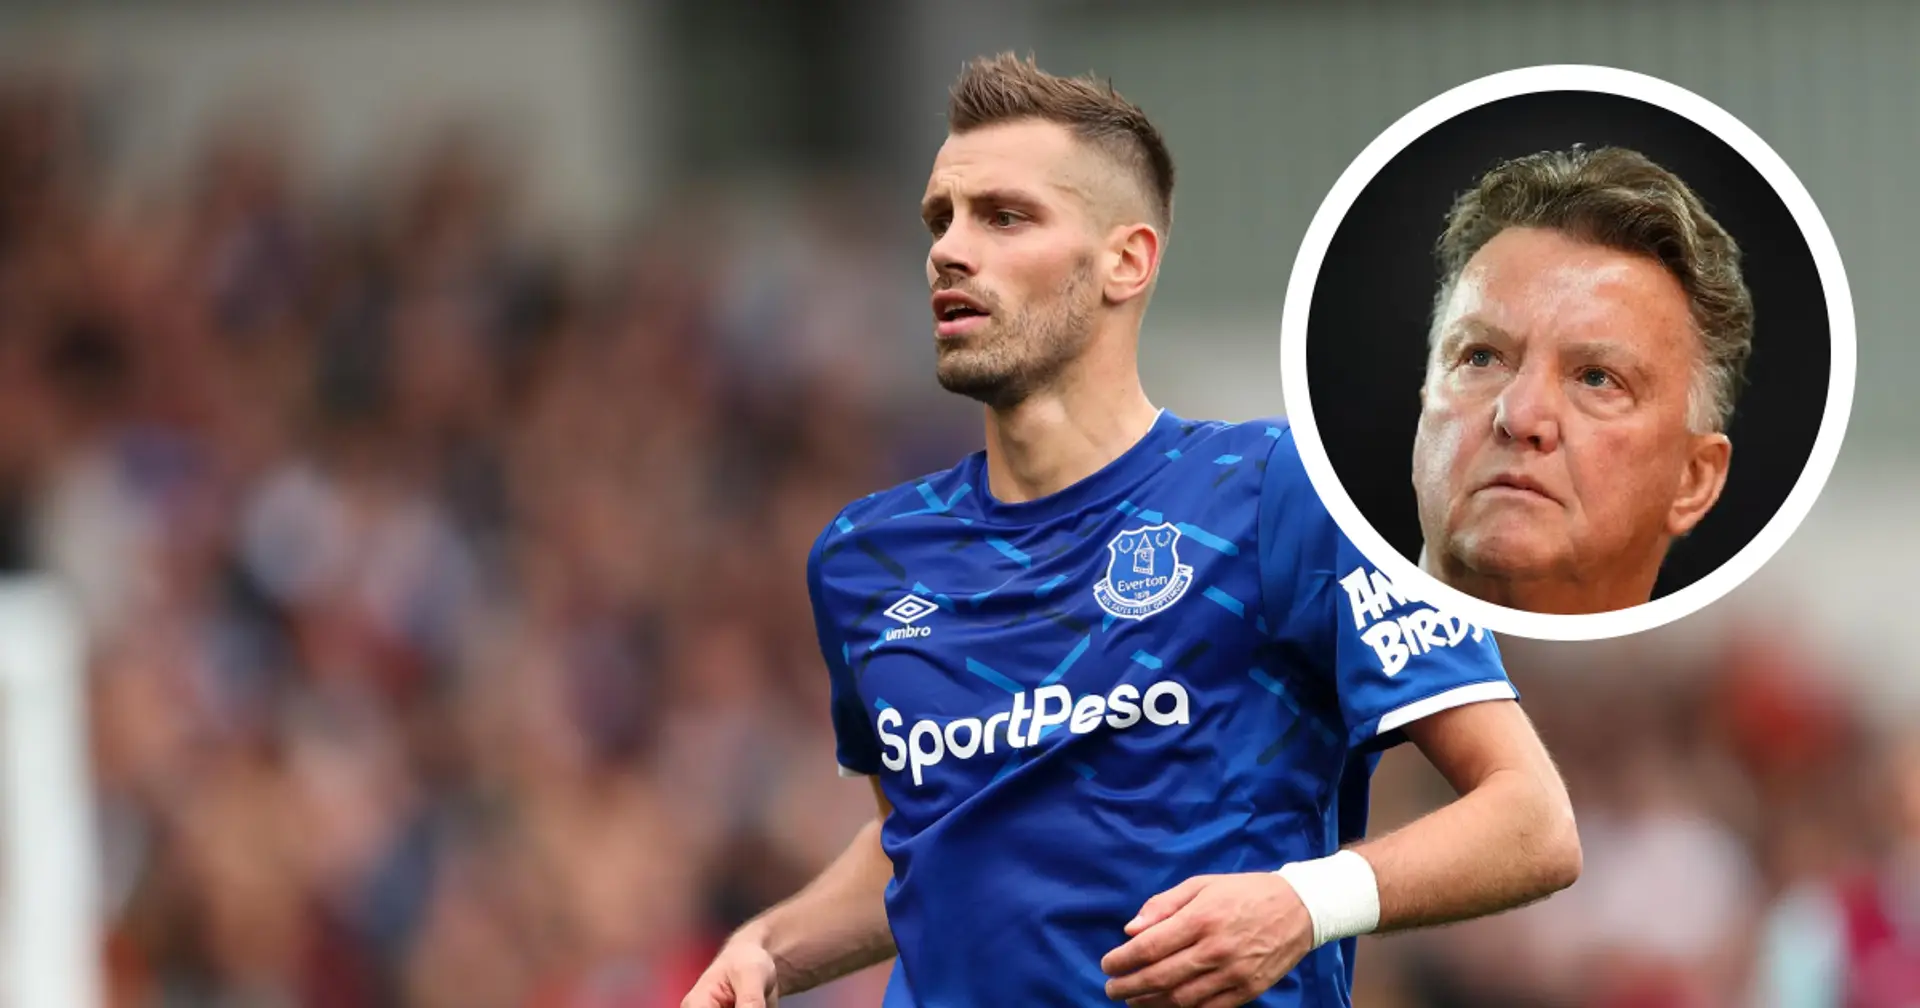 'You had to wait until the manager told you to eat': Morgan Schneiderlin opens up on struggles under Van Gaal at United